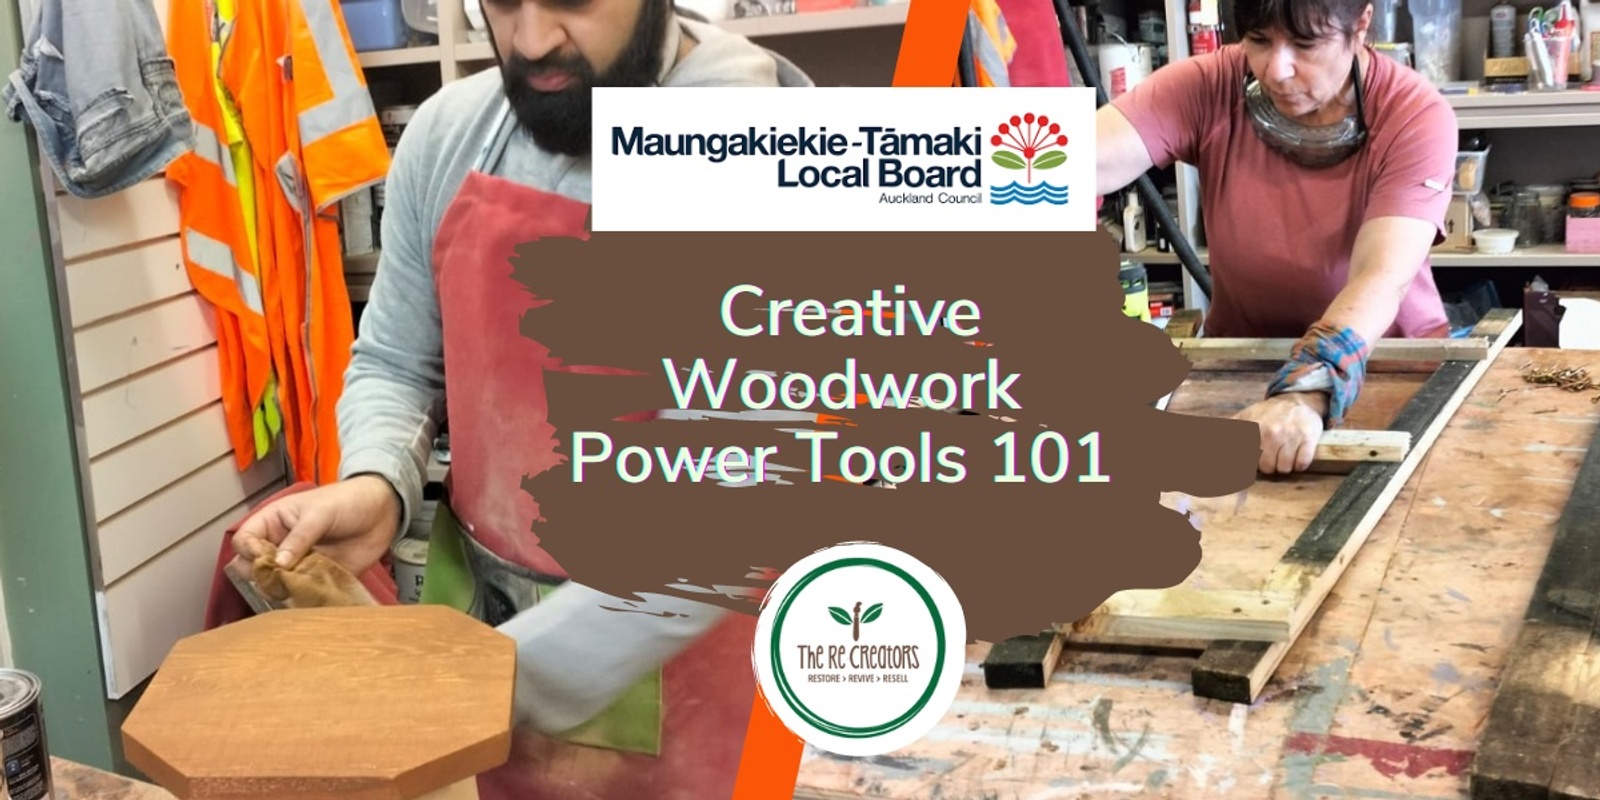 Banner image for  Creative Upcycled Woodwork Power Tools 101, Oranga Community Centre, Thursday 29 February 10am-2pm